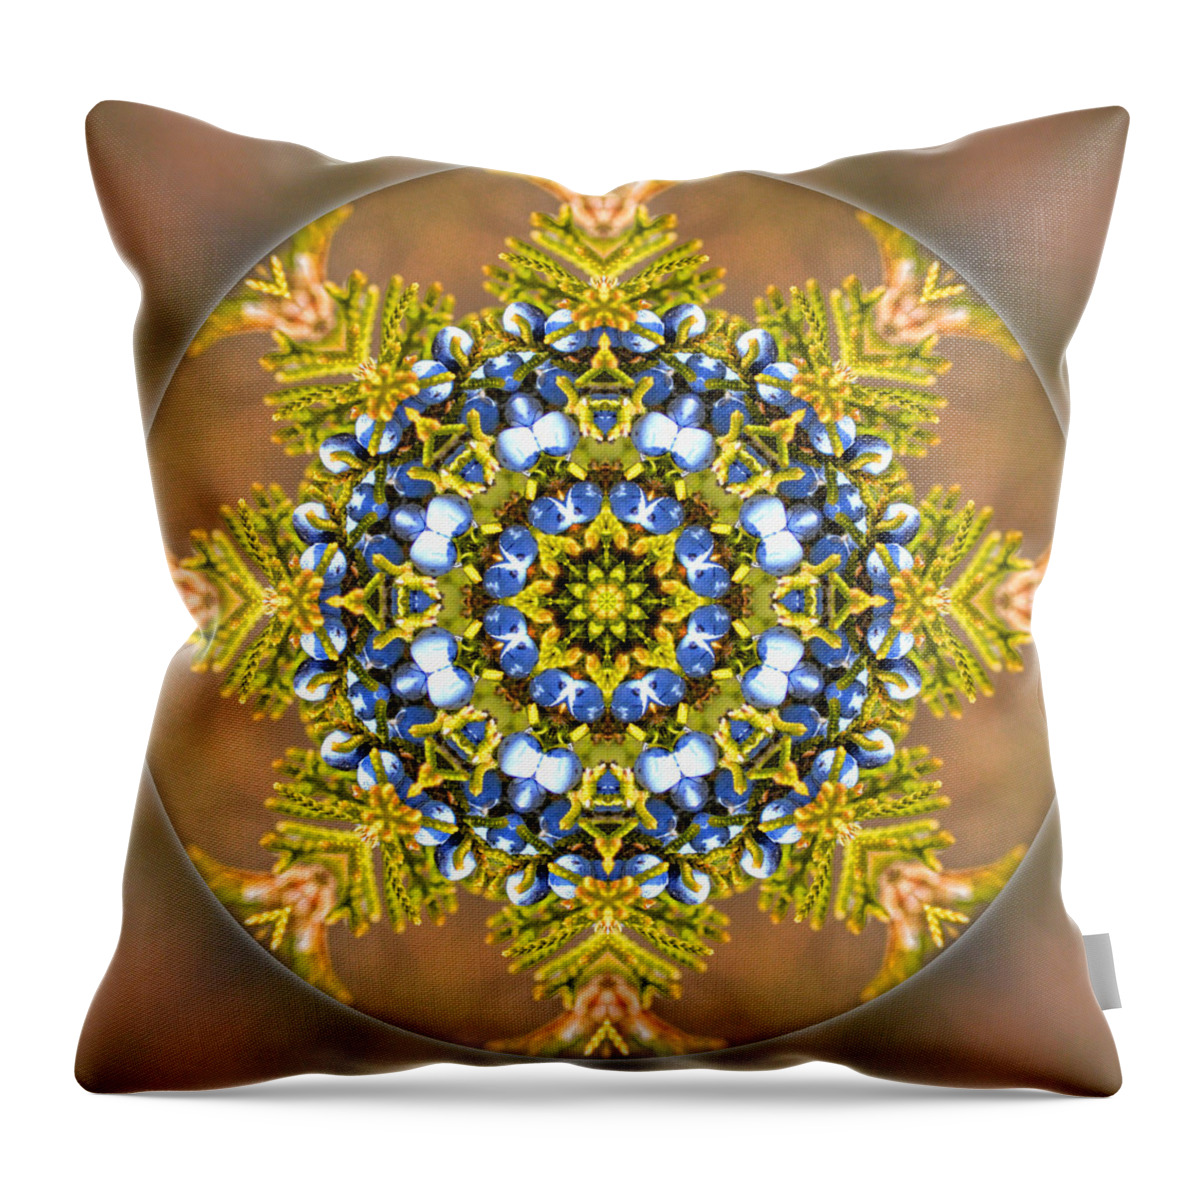  Throw Pillow featuring the photograph Winter Solstice Mandala by Beth Sawickie